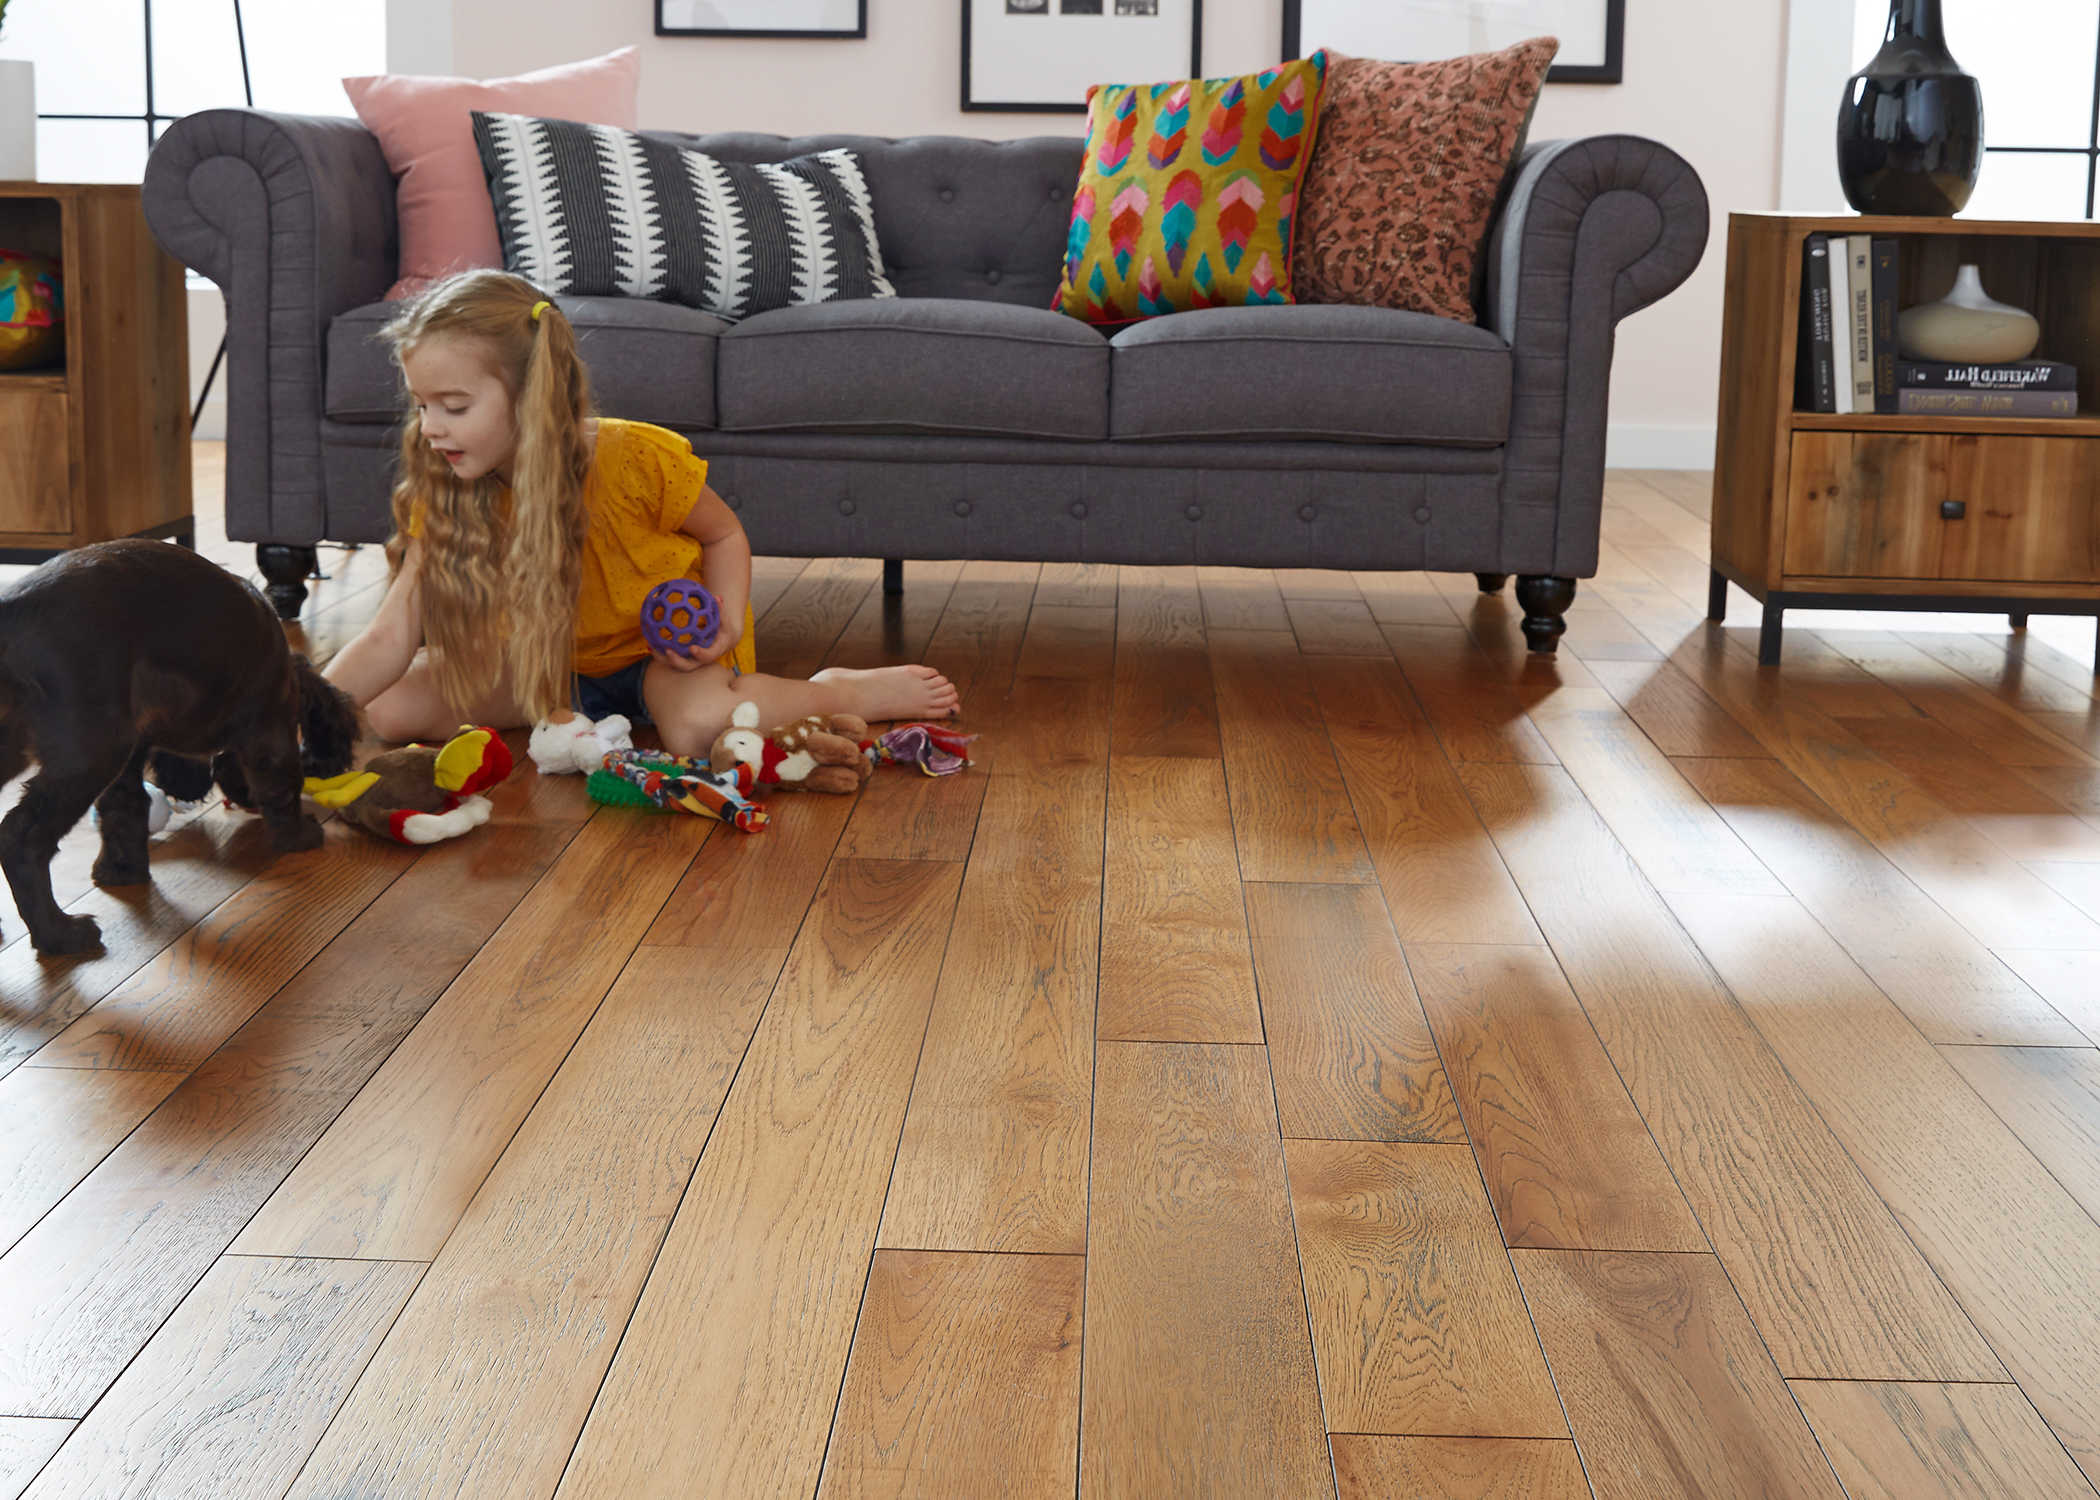 3/4 in. x 5 in. Pepperell Hickory Solid Hardwood Flooring in living room with dark gray sofa and little girl in yellow shirt on floor playing with puppy